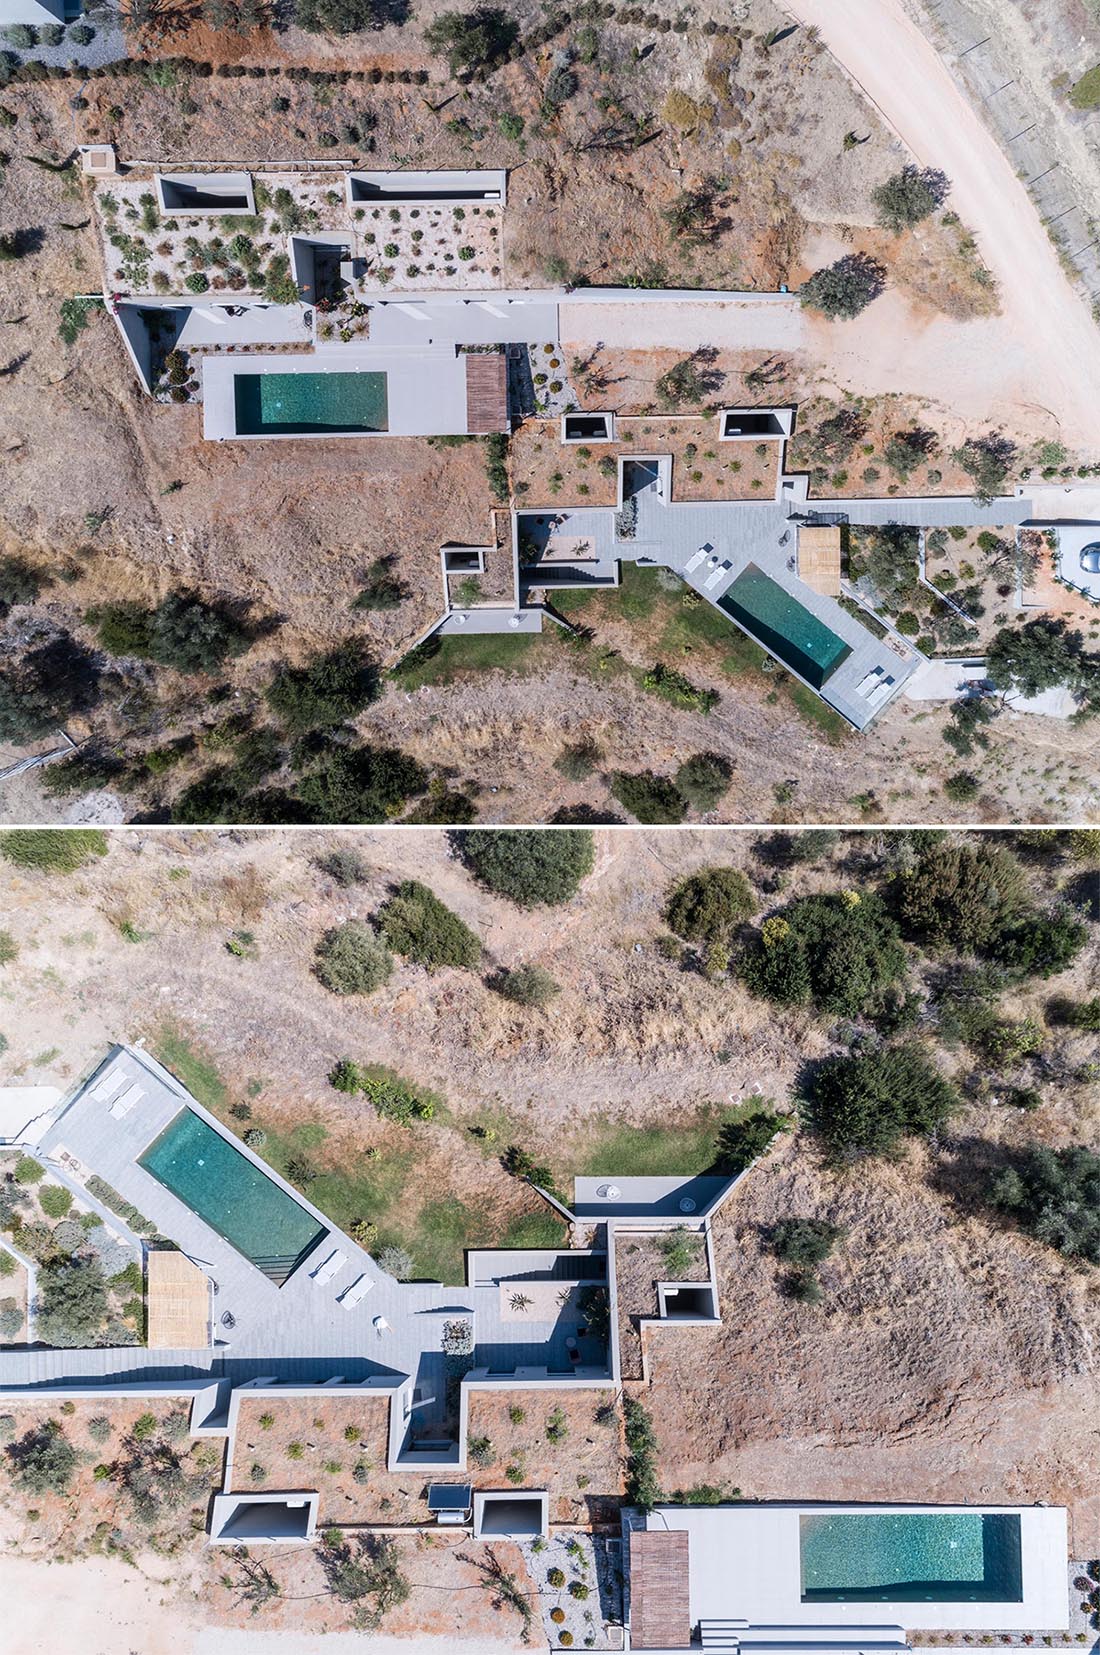 A trio of modern houses built into the hillside have multiple green roofs to help it blend in.